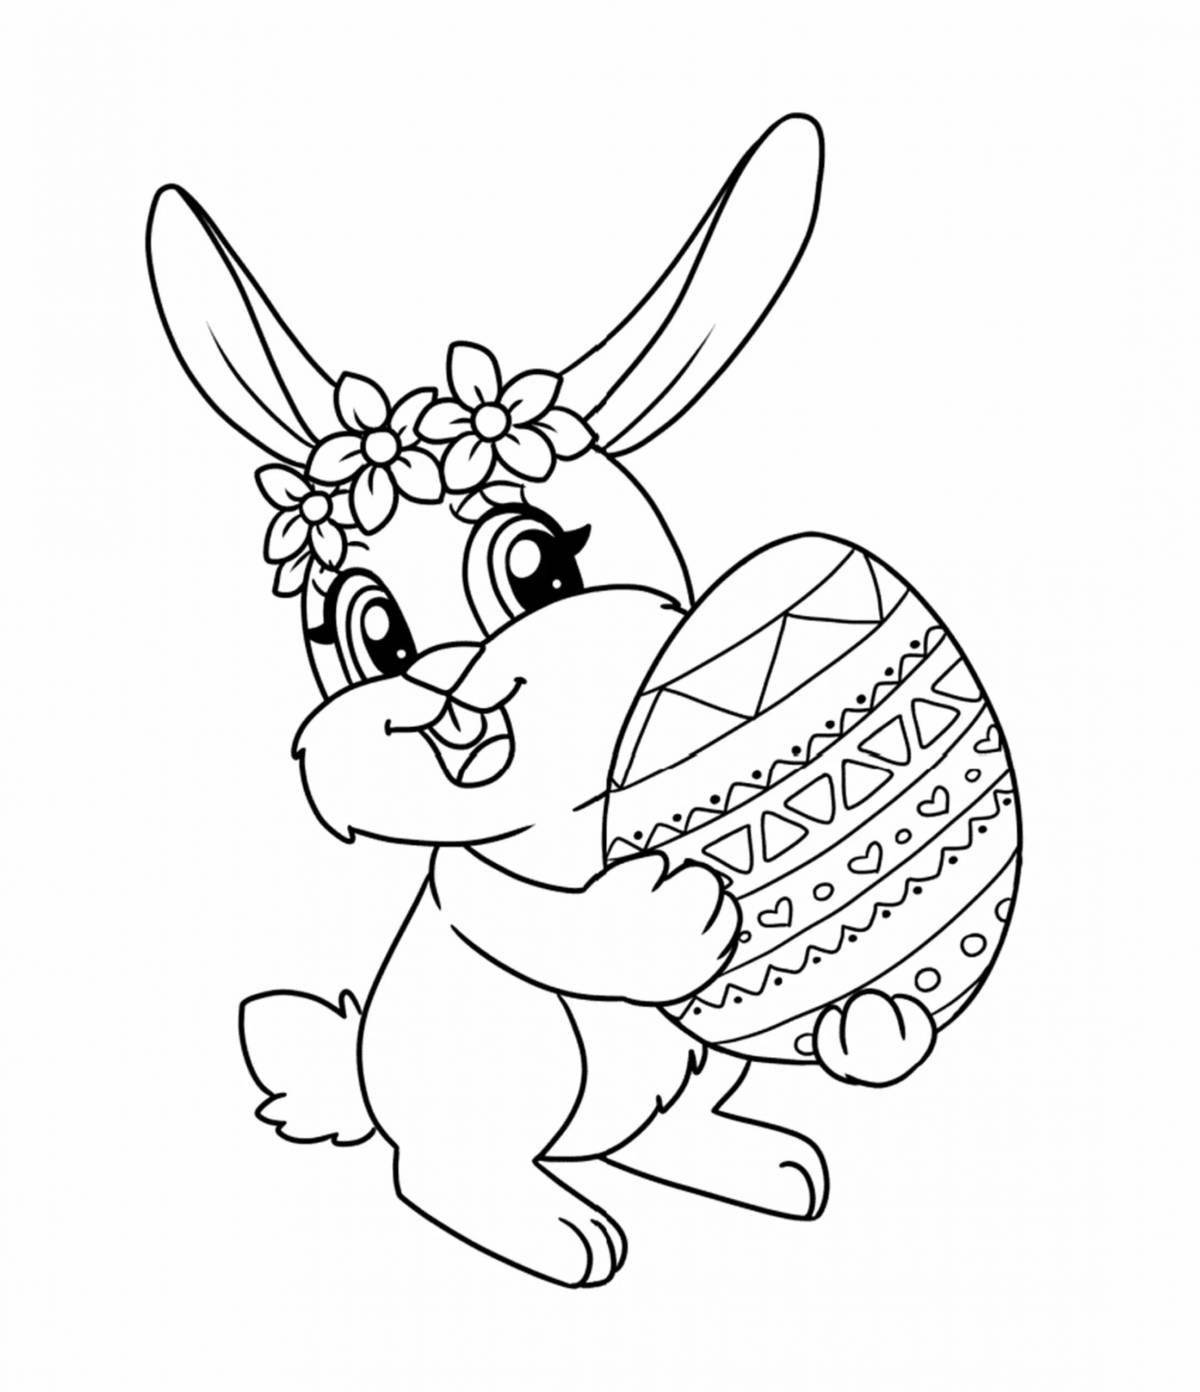 Great rabbit coloring pages for kids 2-3 years old